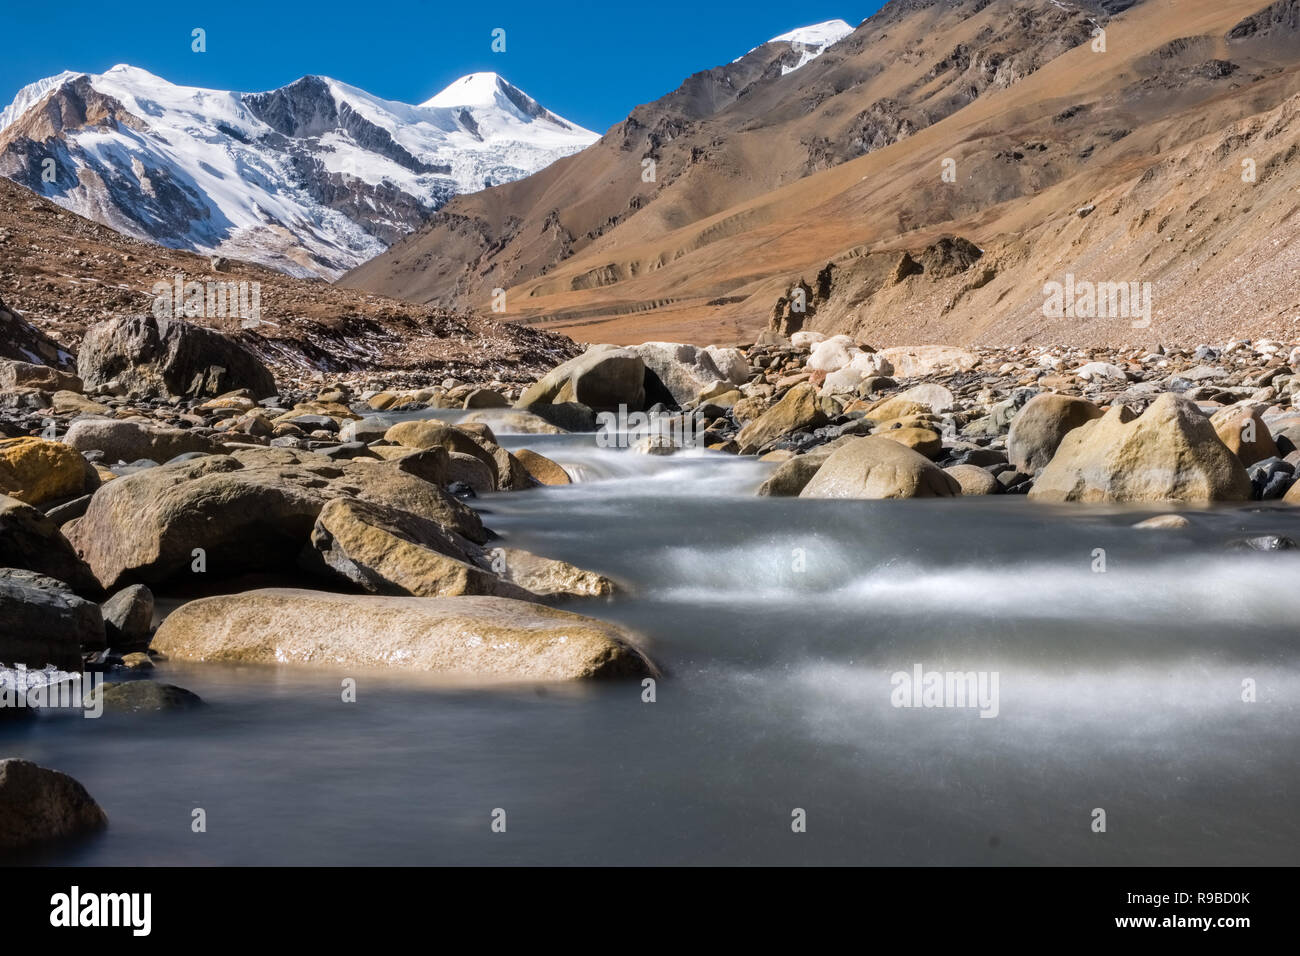 Mountains and a glacial river in the Manaslu region of the Nepal Himalayas Stock Photo